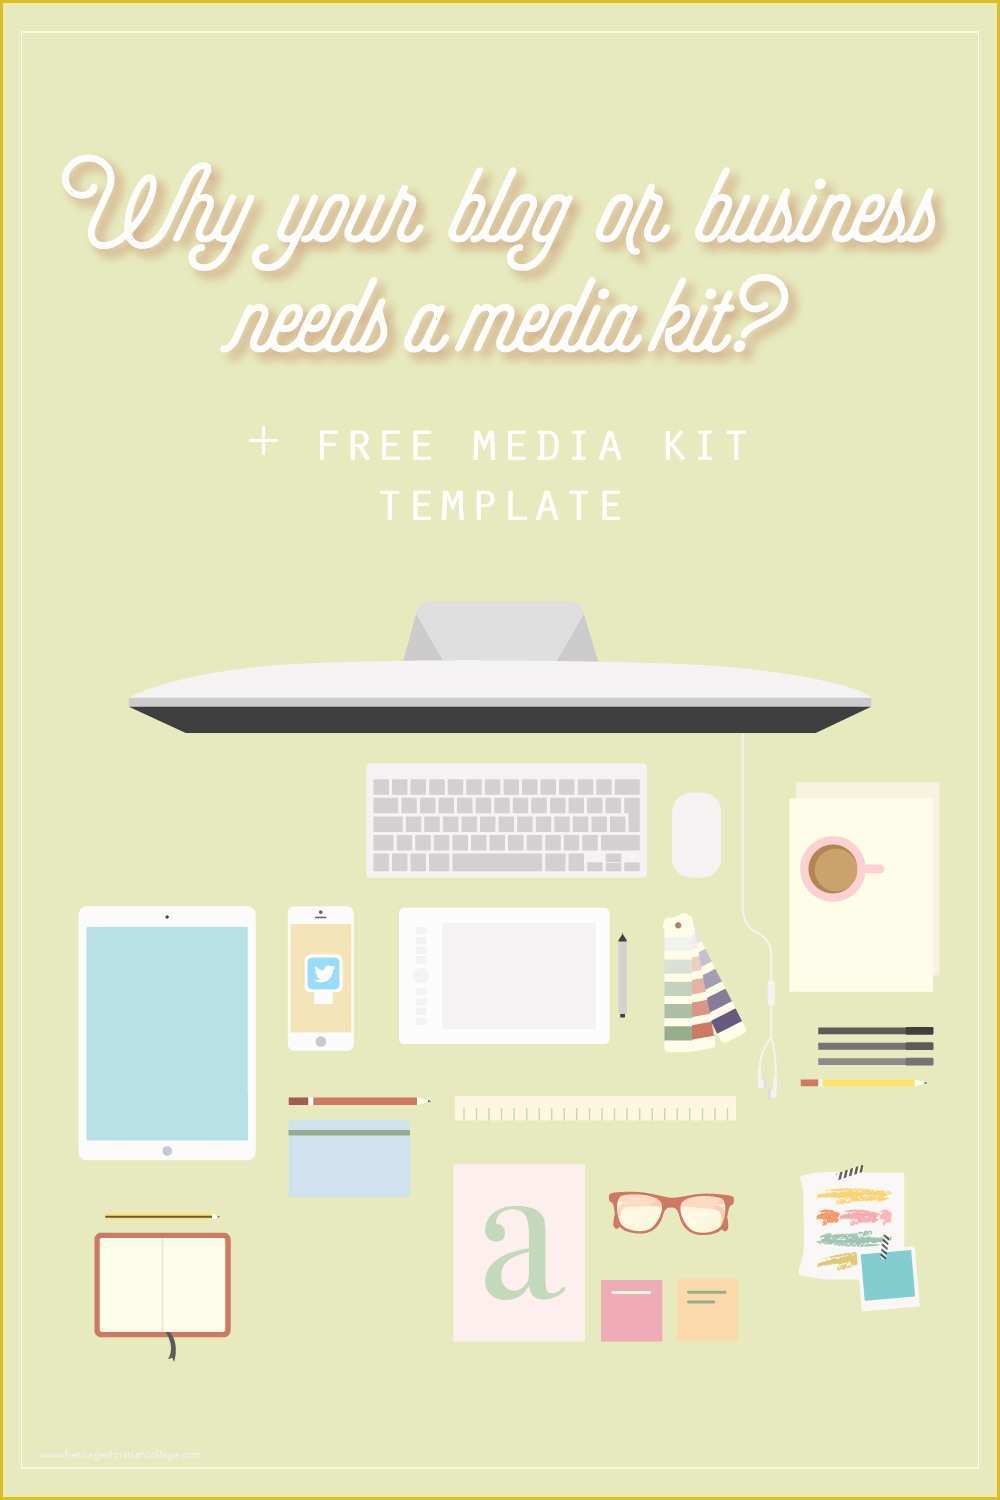 Free Press Kit Template Download Of why Your Blog or Business Needs A Media Kit Free Media